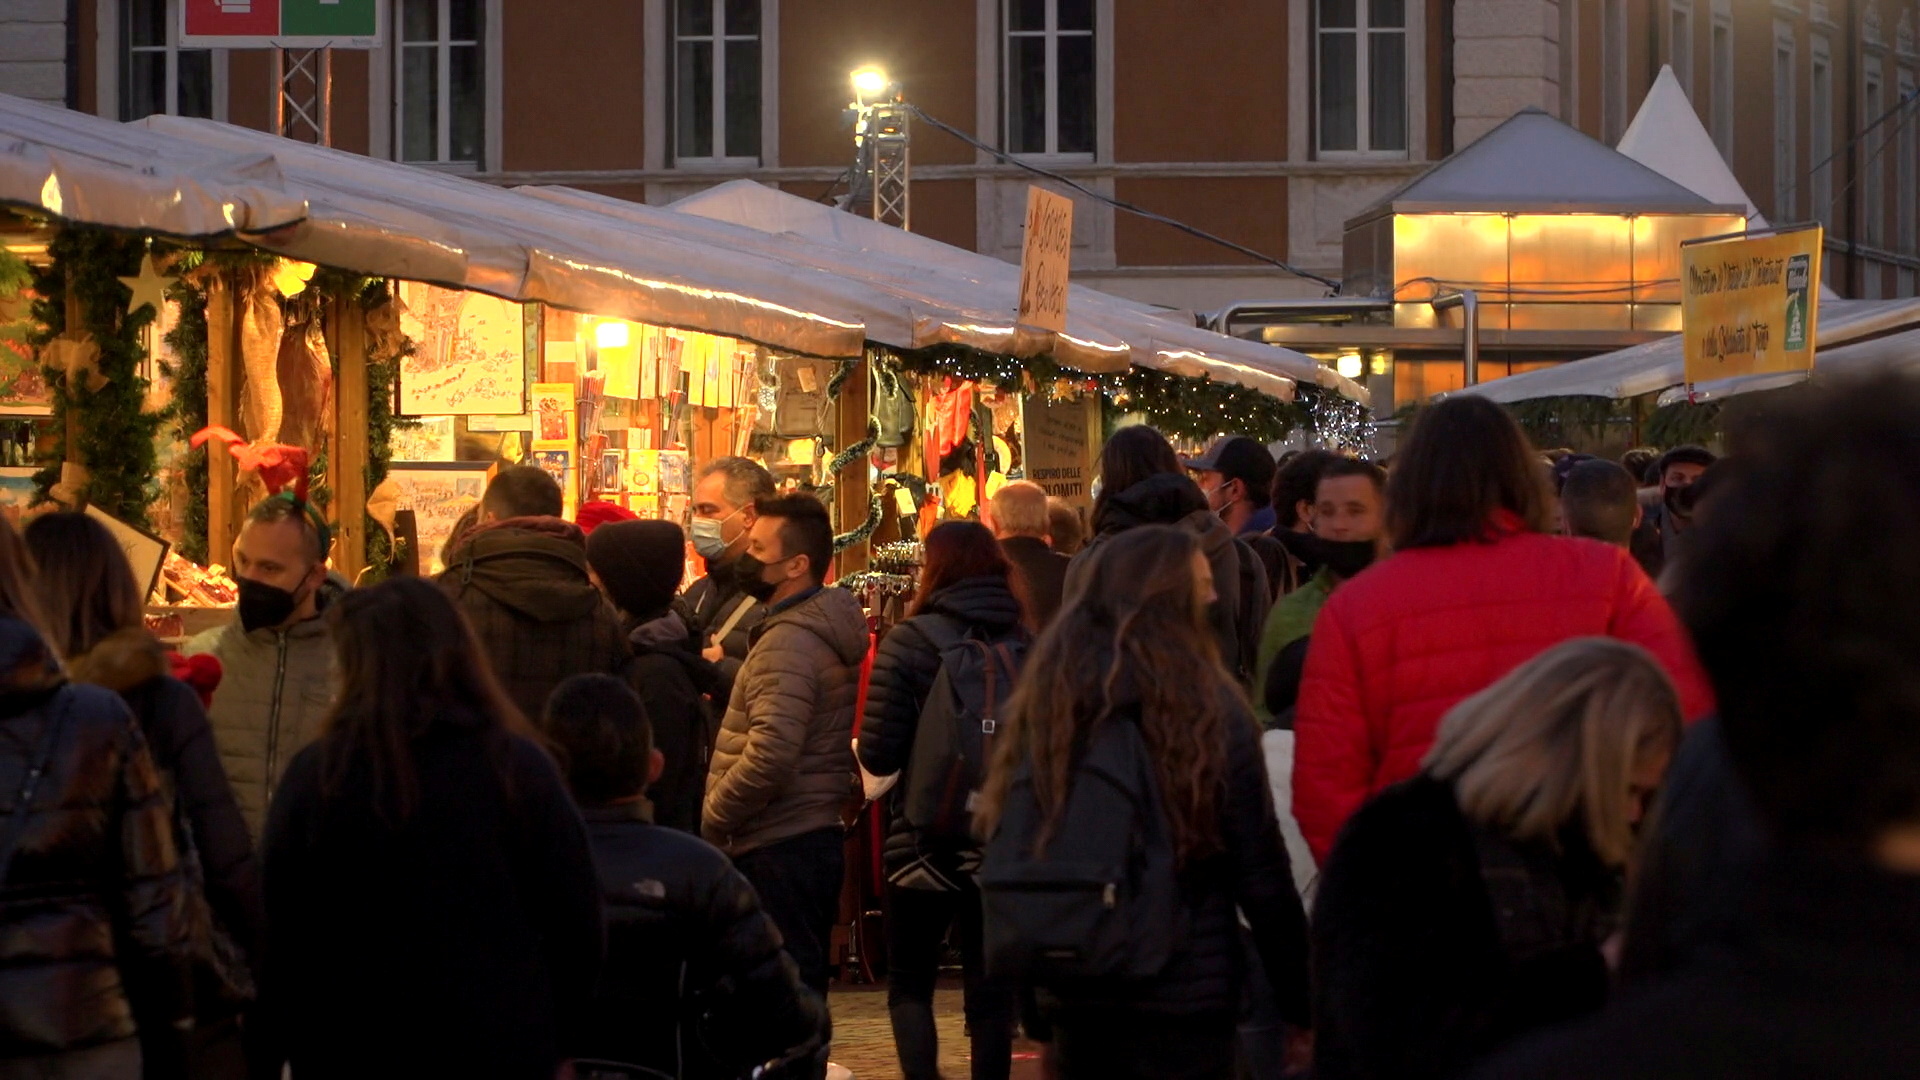 Christmas markets begin opening in Italy despite fears of growing COVID-19 infection numbers